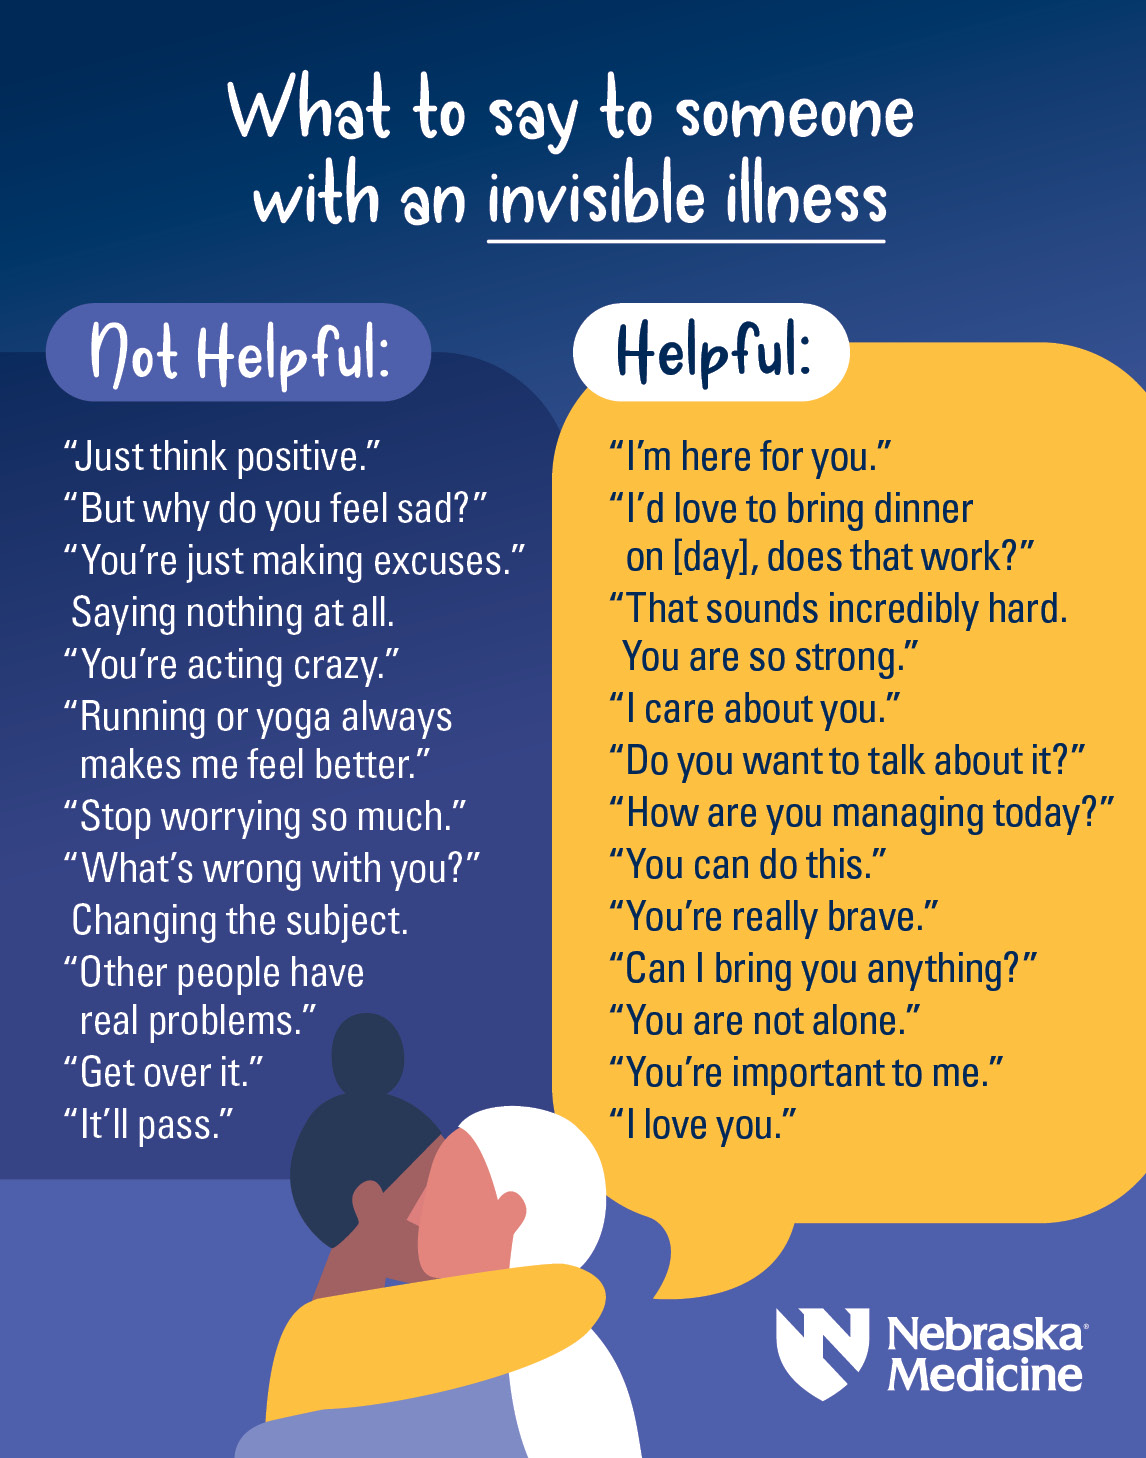 Infographic with list of phrases not to say to someone with an invisible illness